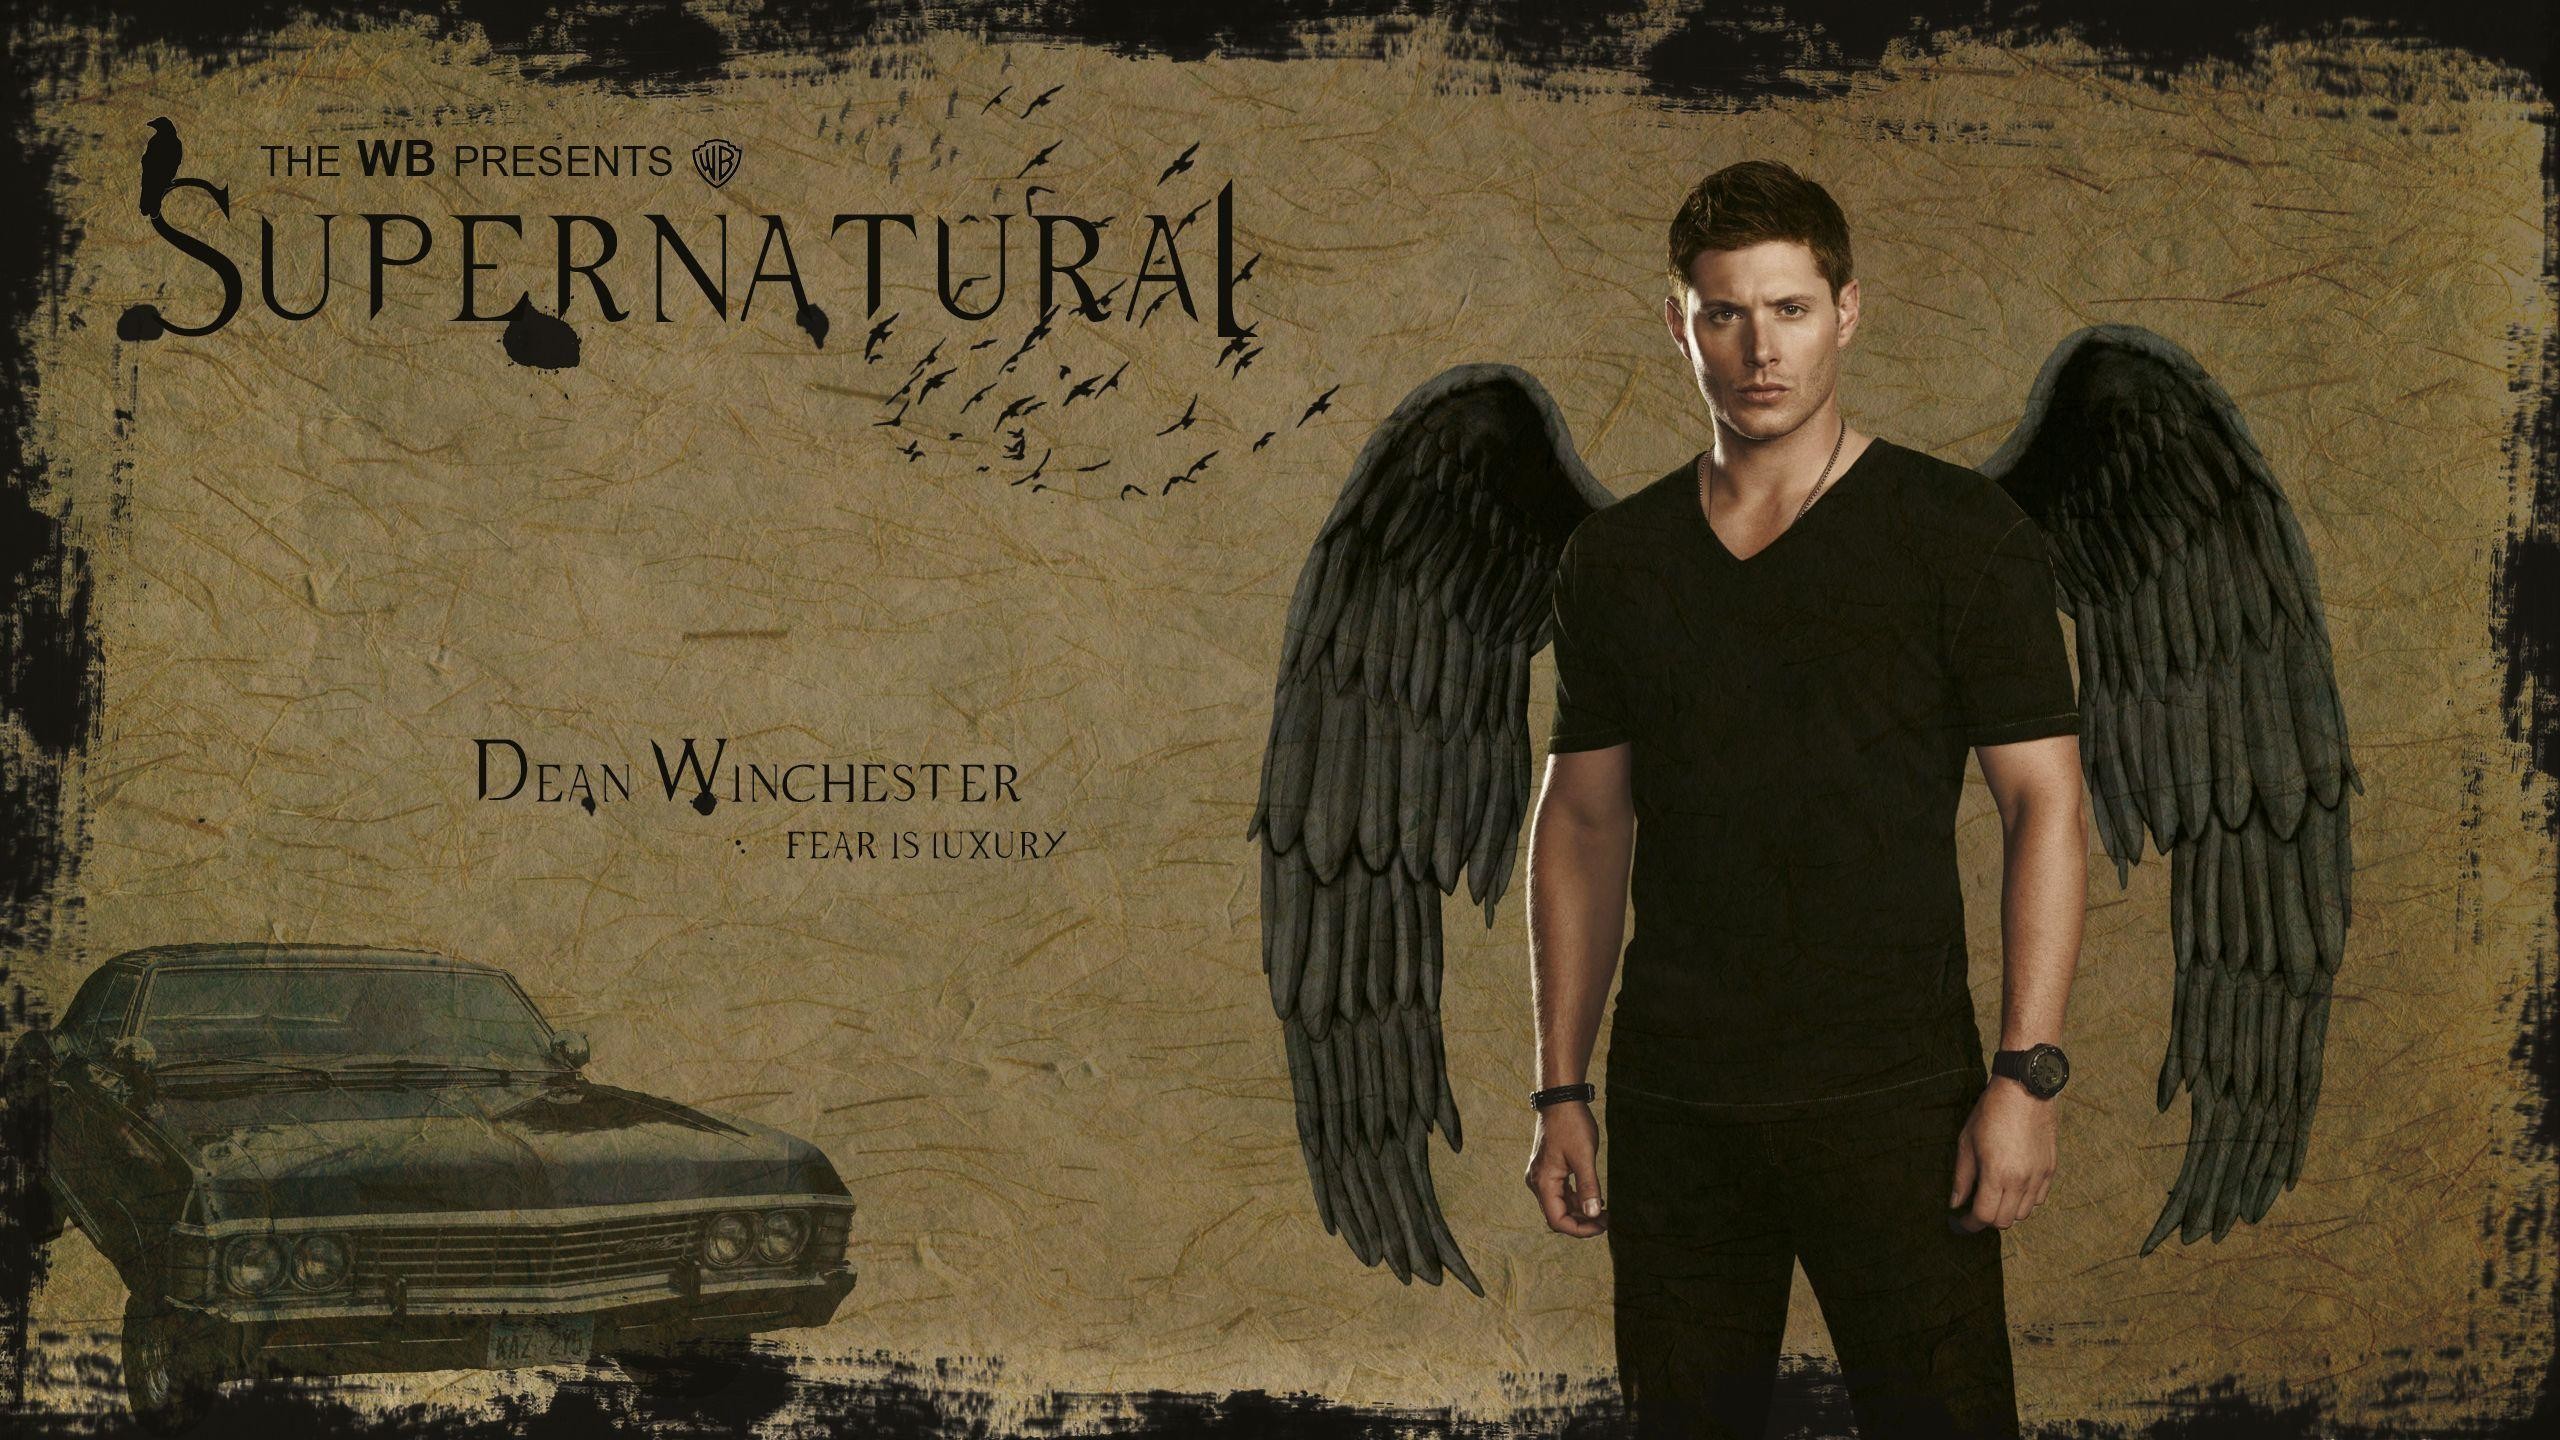 Supernatural – Dean and Sam face to face by BeAware8 on DeviantArt